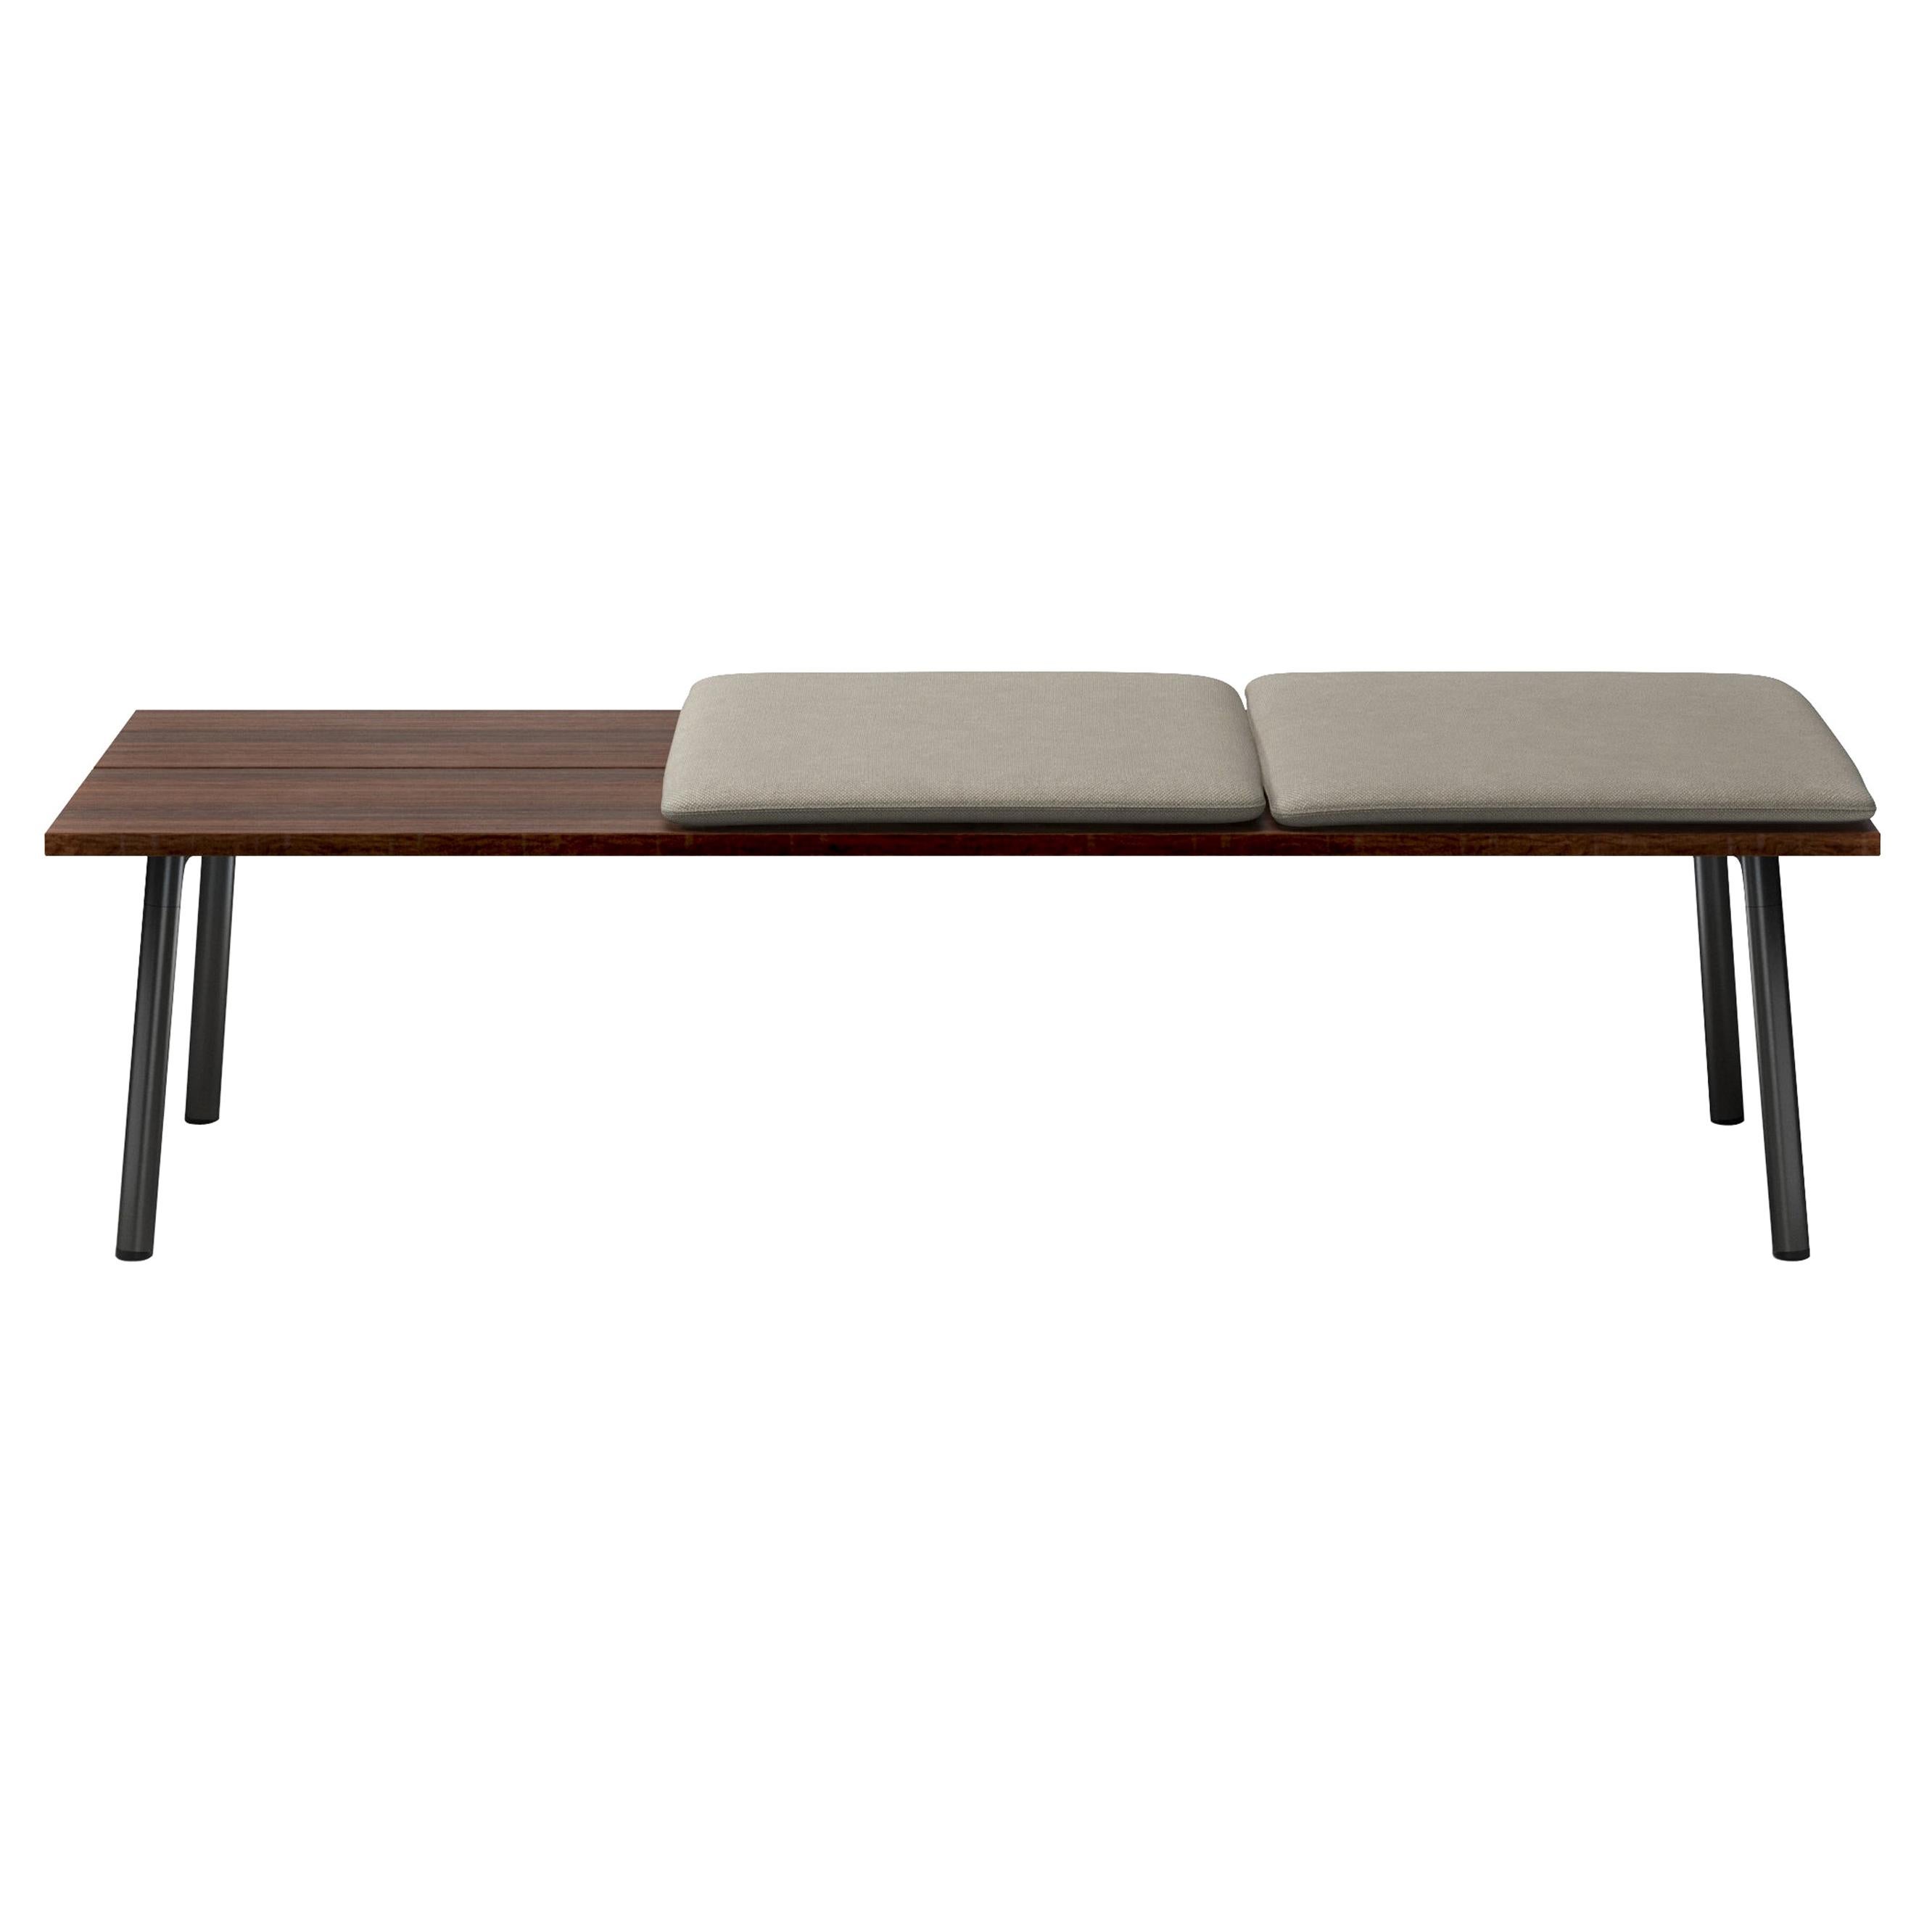 Run Daybed 72" Kvadrat Hallingdal 200 Fabric With Walnut Top And Black Aluminum  For Sale